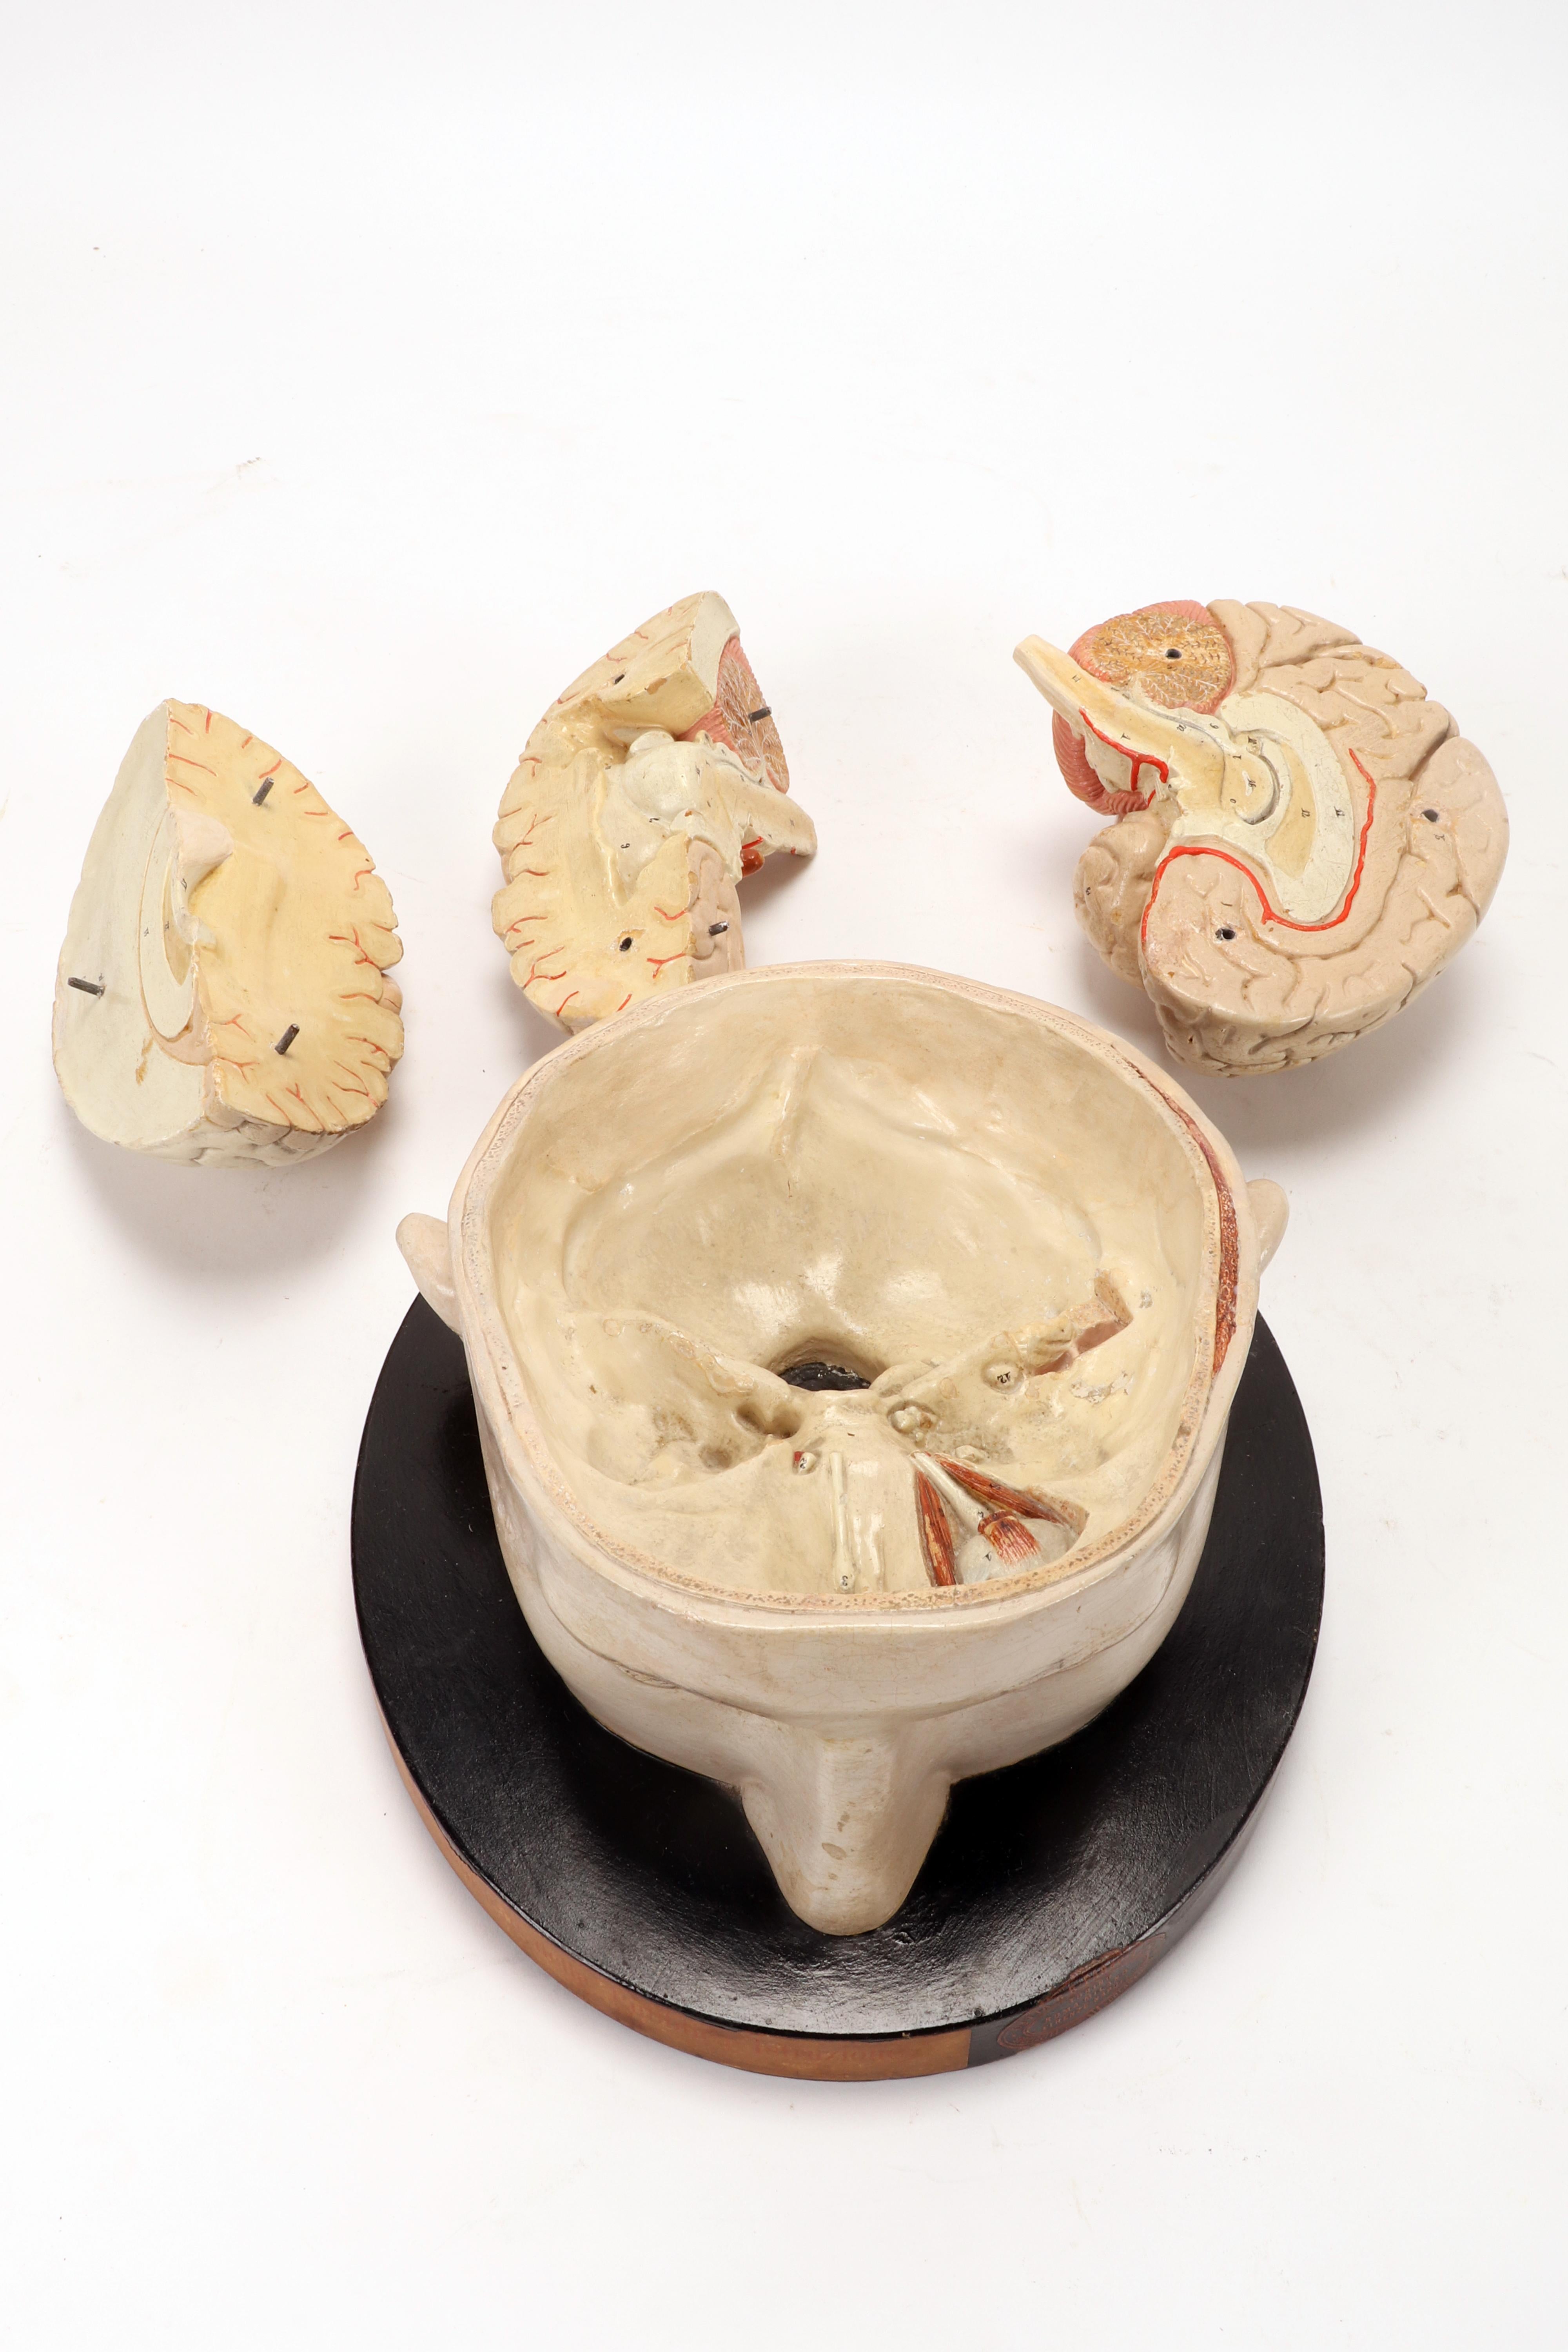 Anatomical model: a brain inserted into a sectioned skullcap, Italy 1920. 2